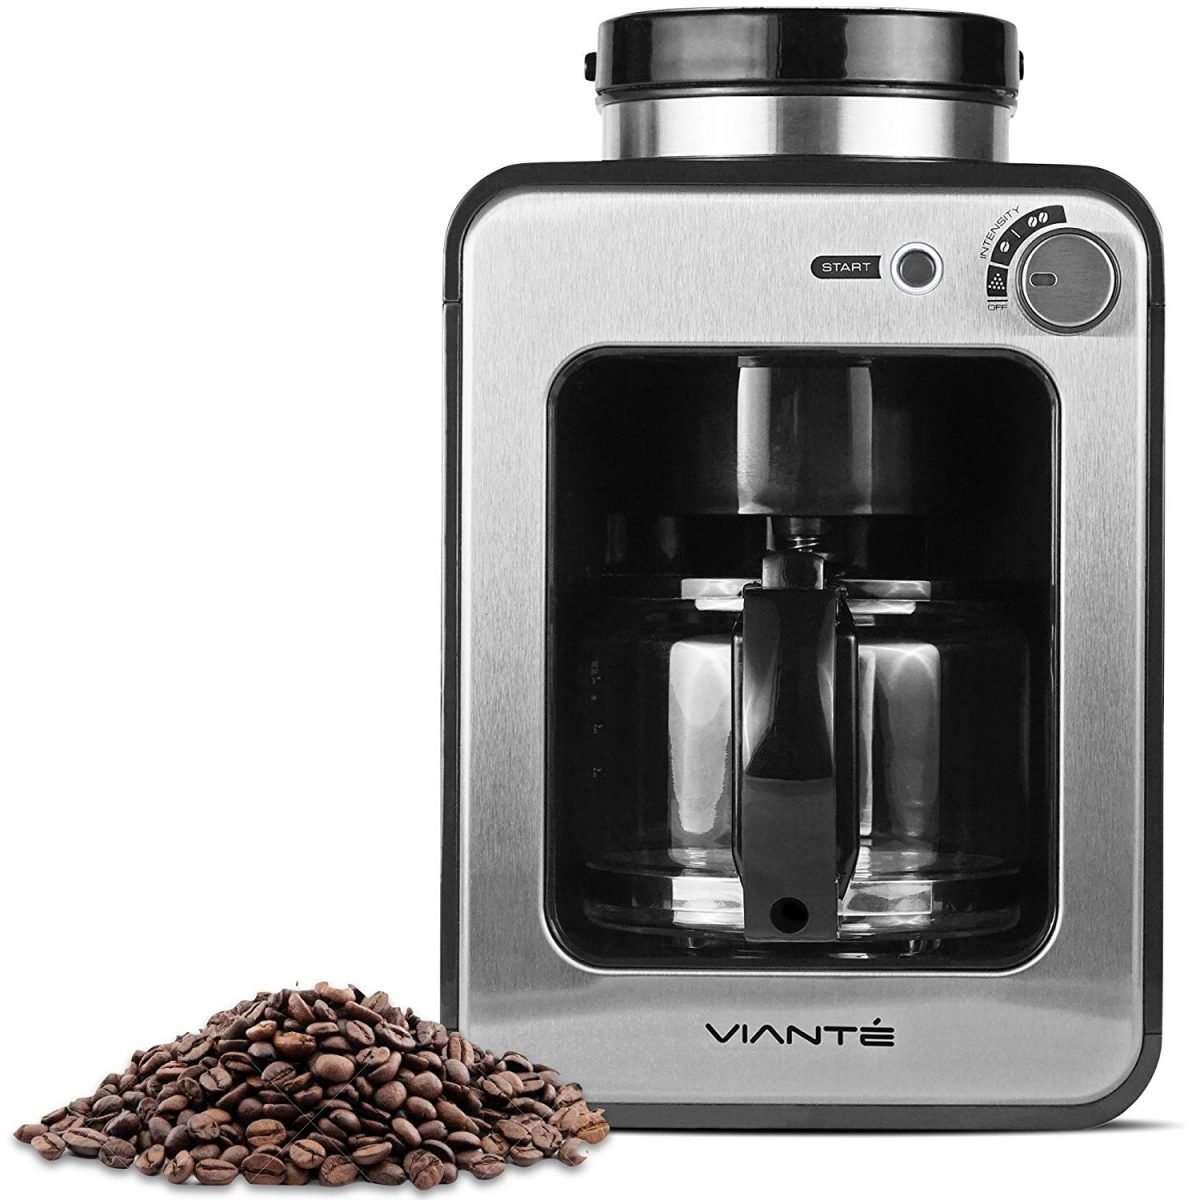 The 5 Best Grind And Brew Coffee Makers to Buy in ...